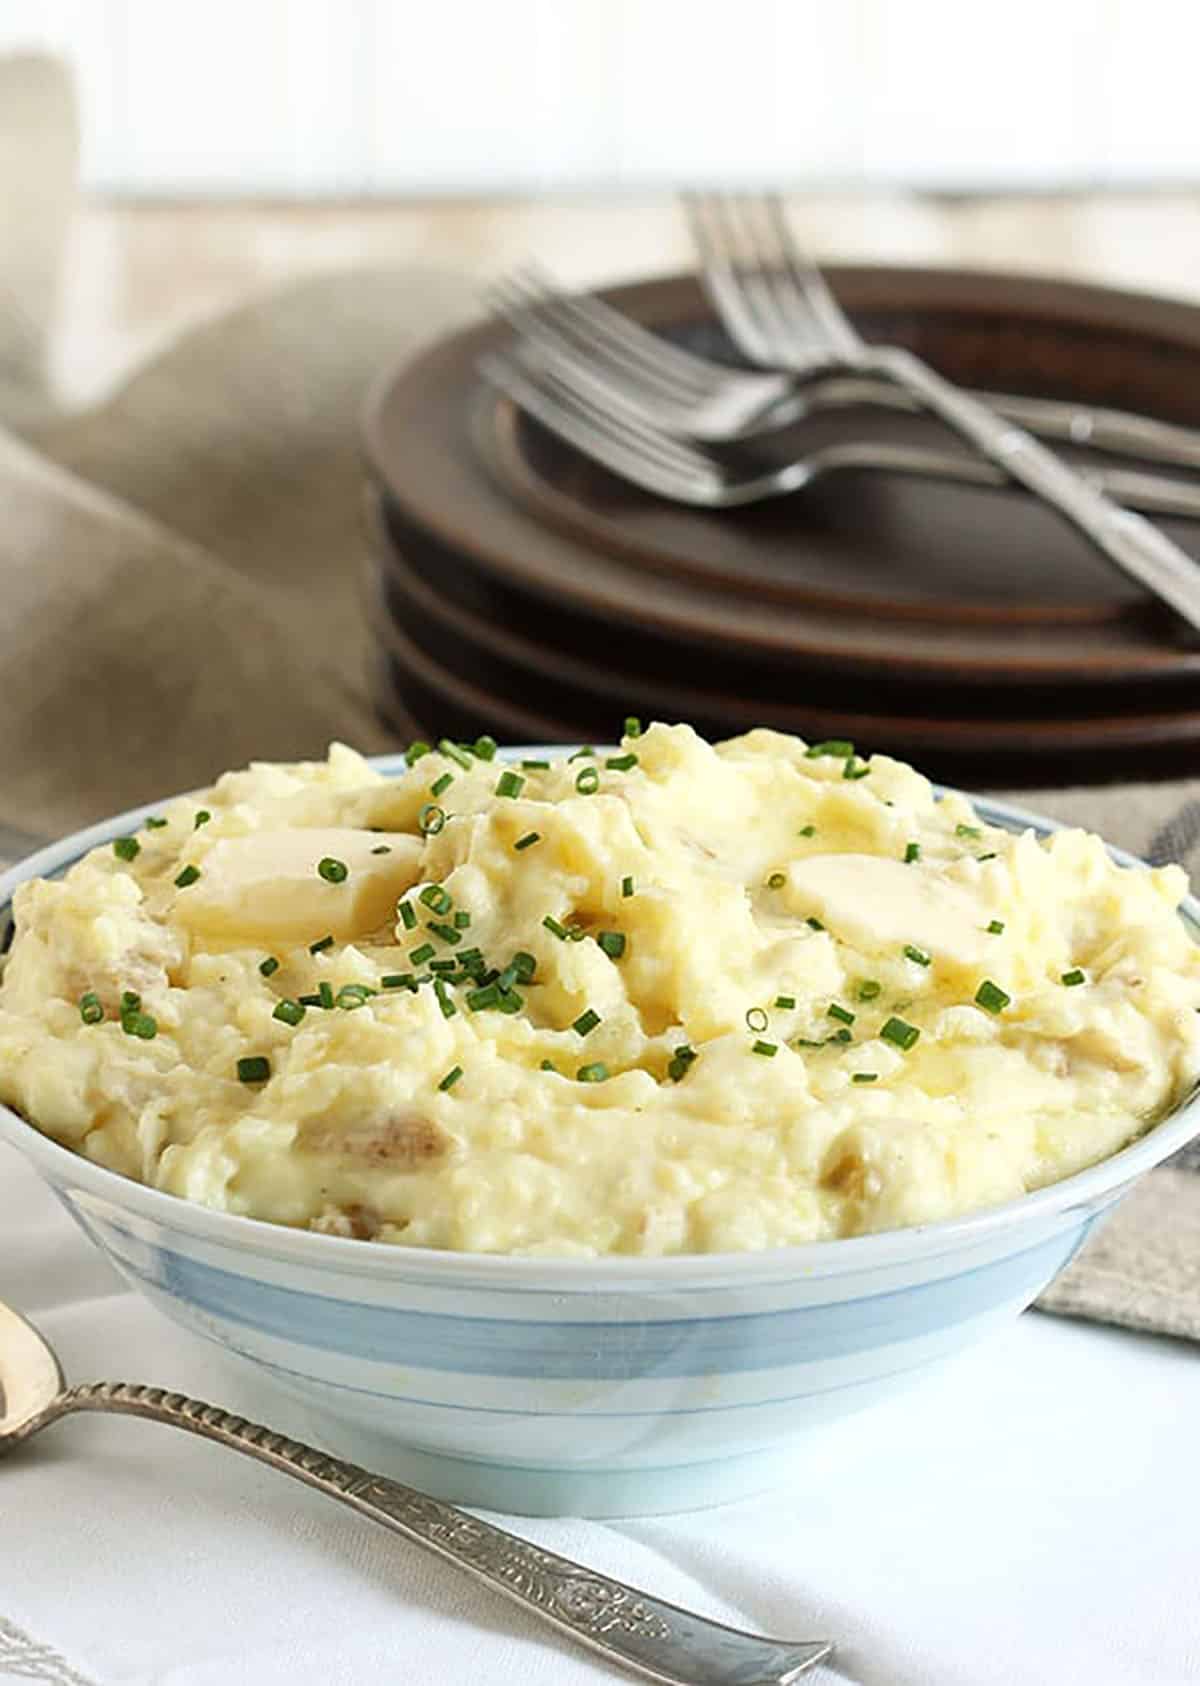 Mashed potatoes in a blue and white bowl with a silver spoon in the front.